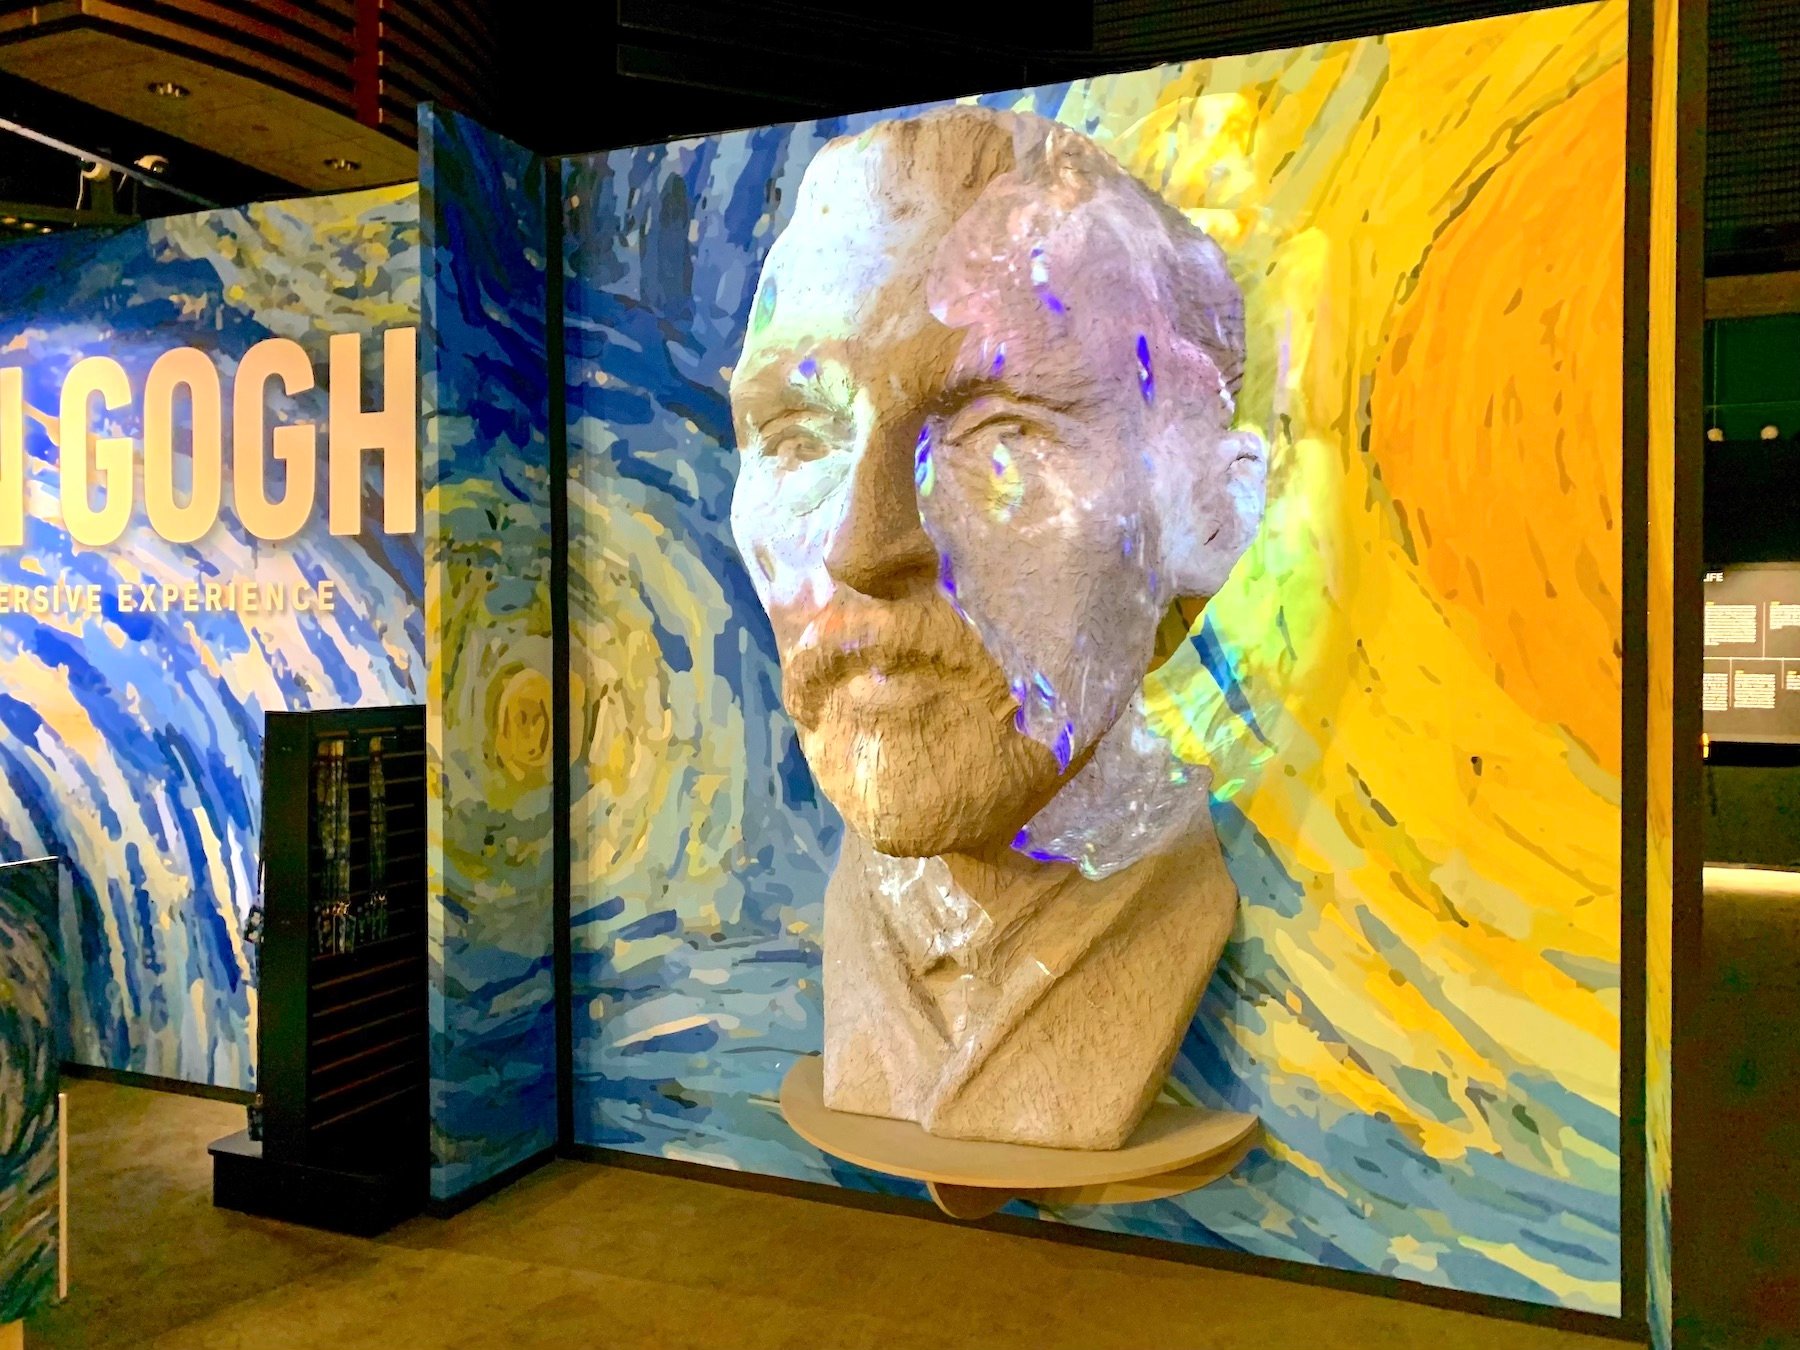 Two Immersive Van Gogh Experiences Offer the Post-Pandemic Escapism